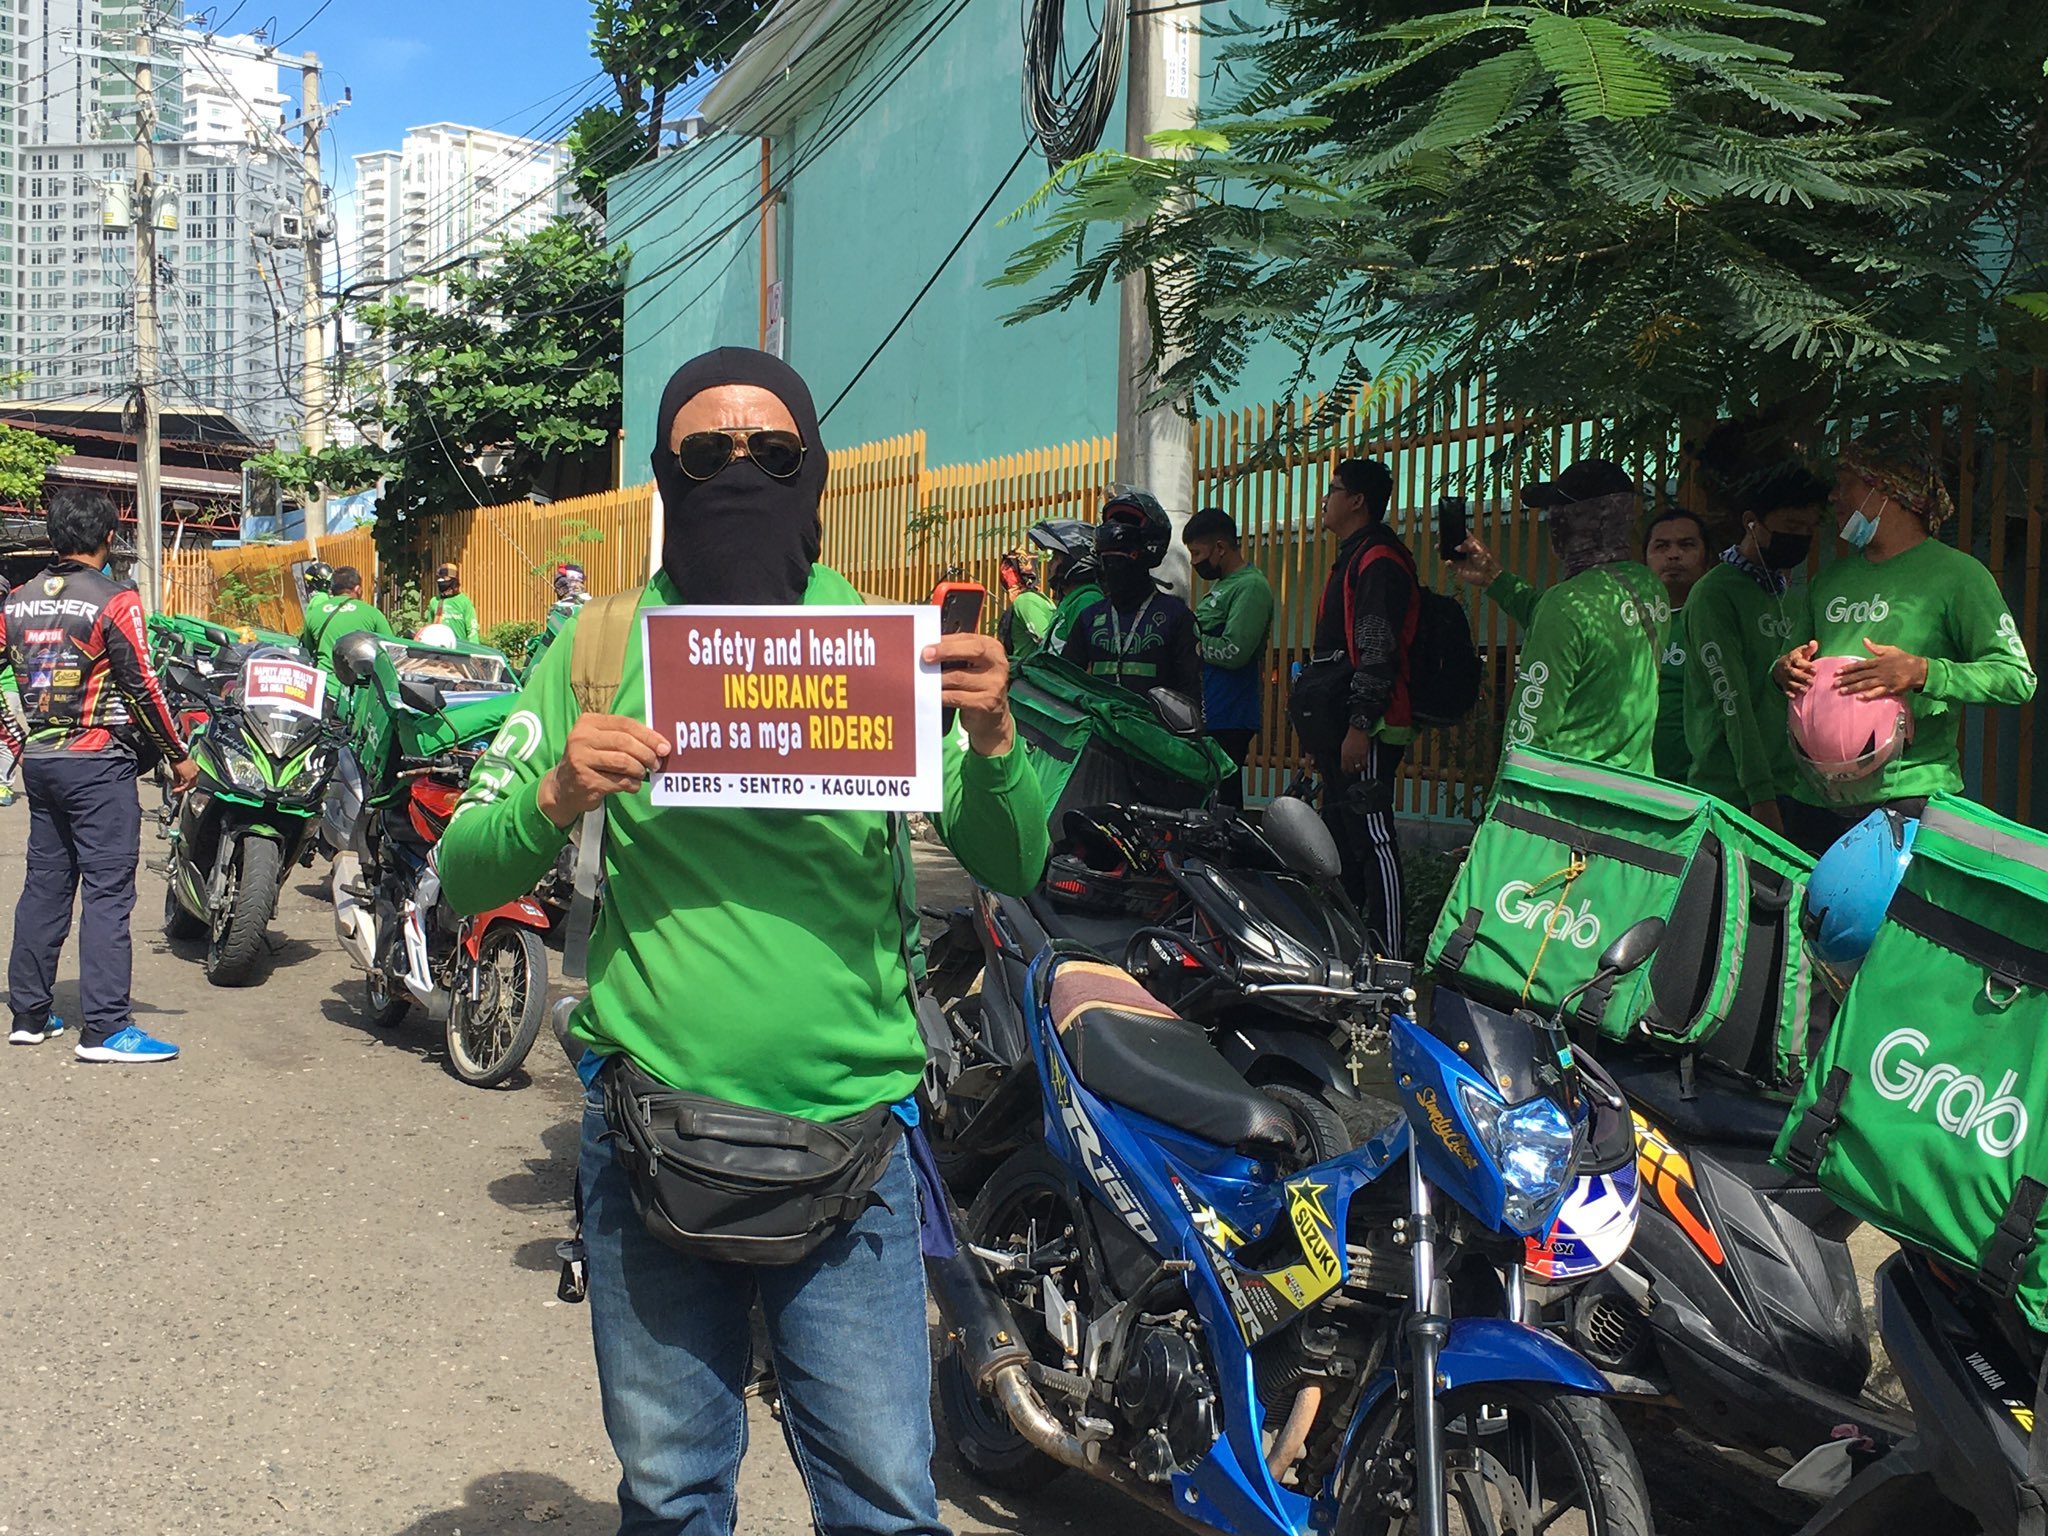 Grab delivery drivers protest pay cuts in Cebu City